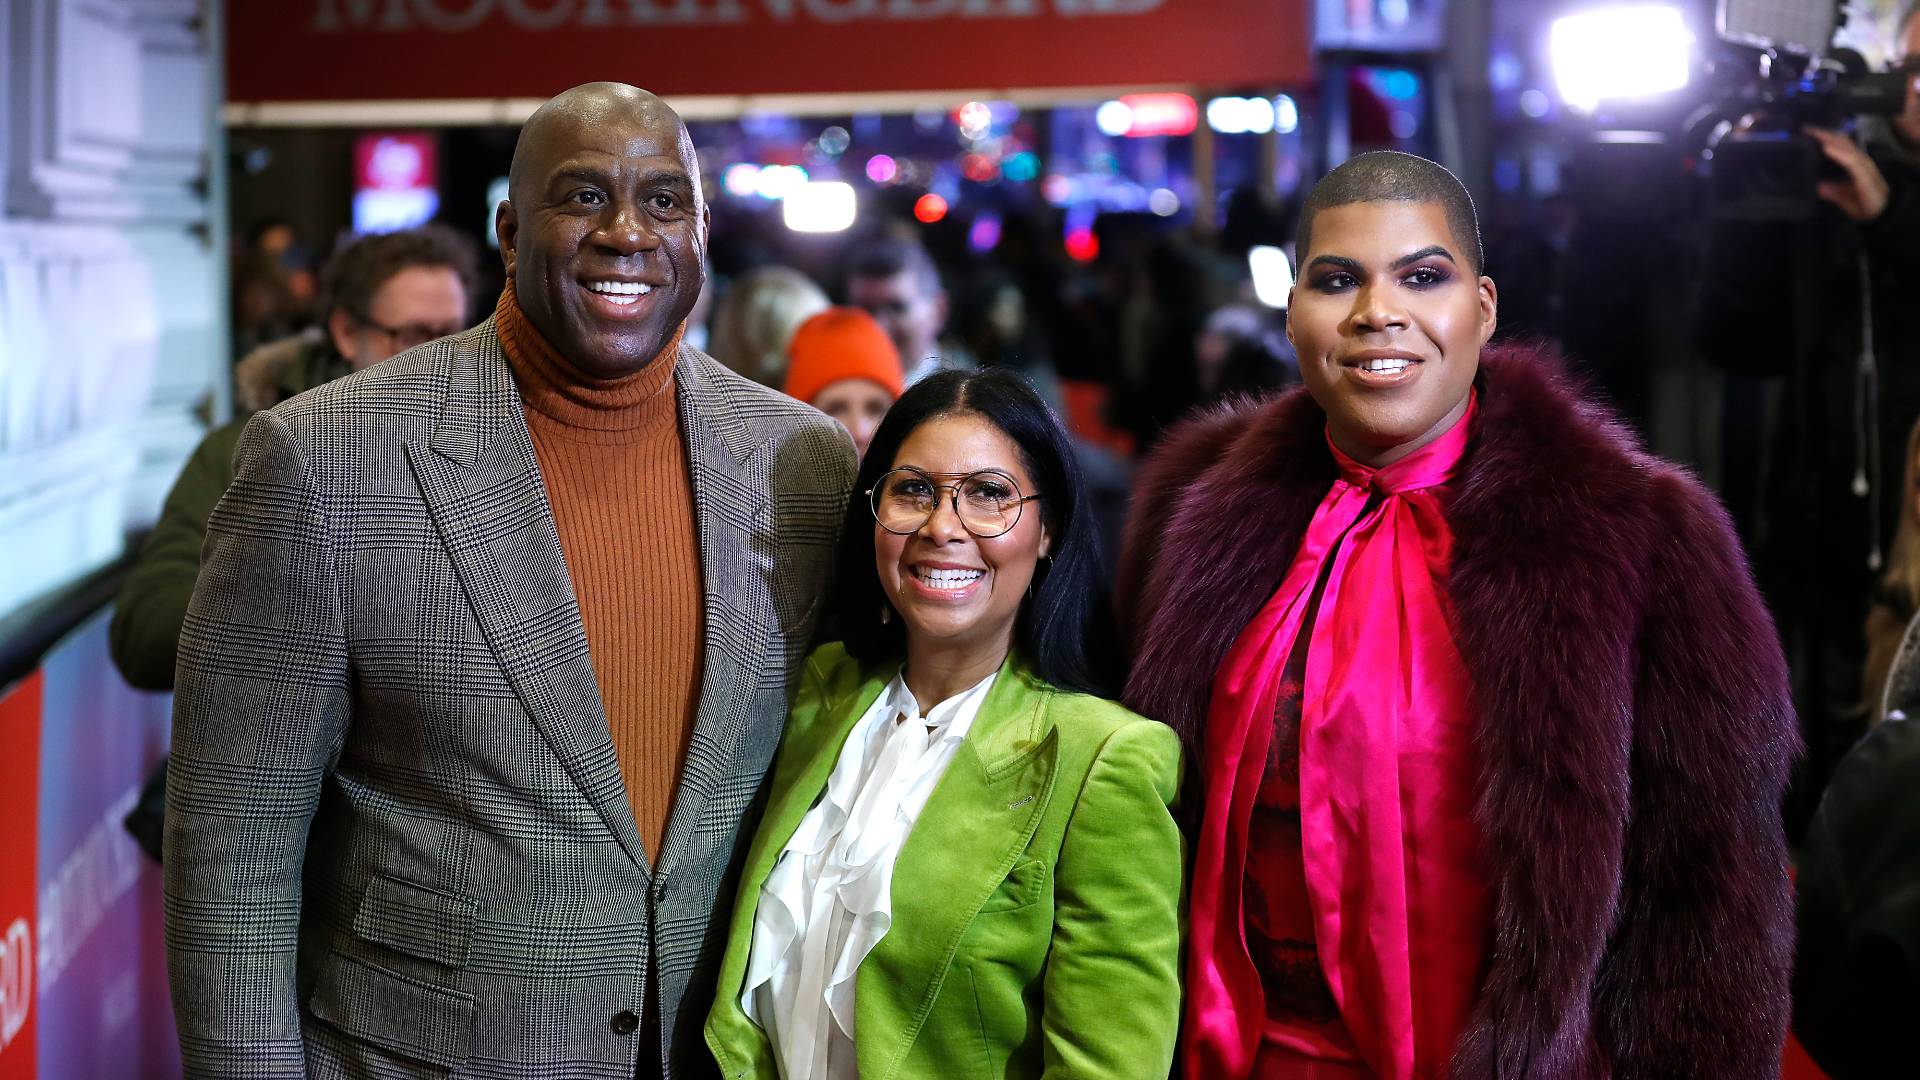 Magic Johnson, an NBA legend, and his family, including son EJ, walked the red carpet in New York